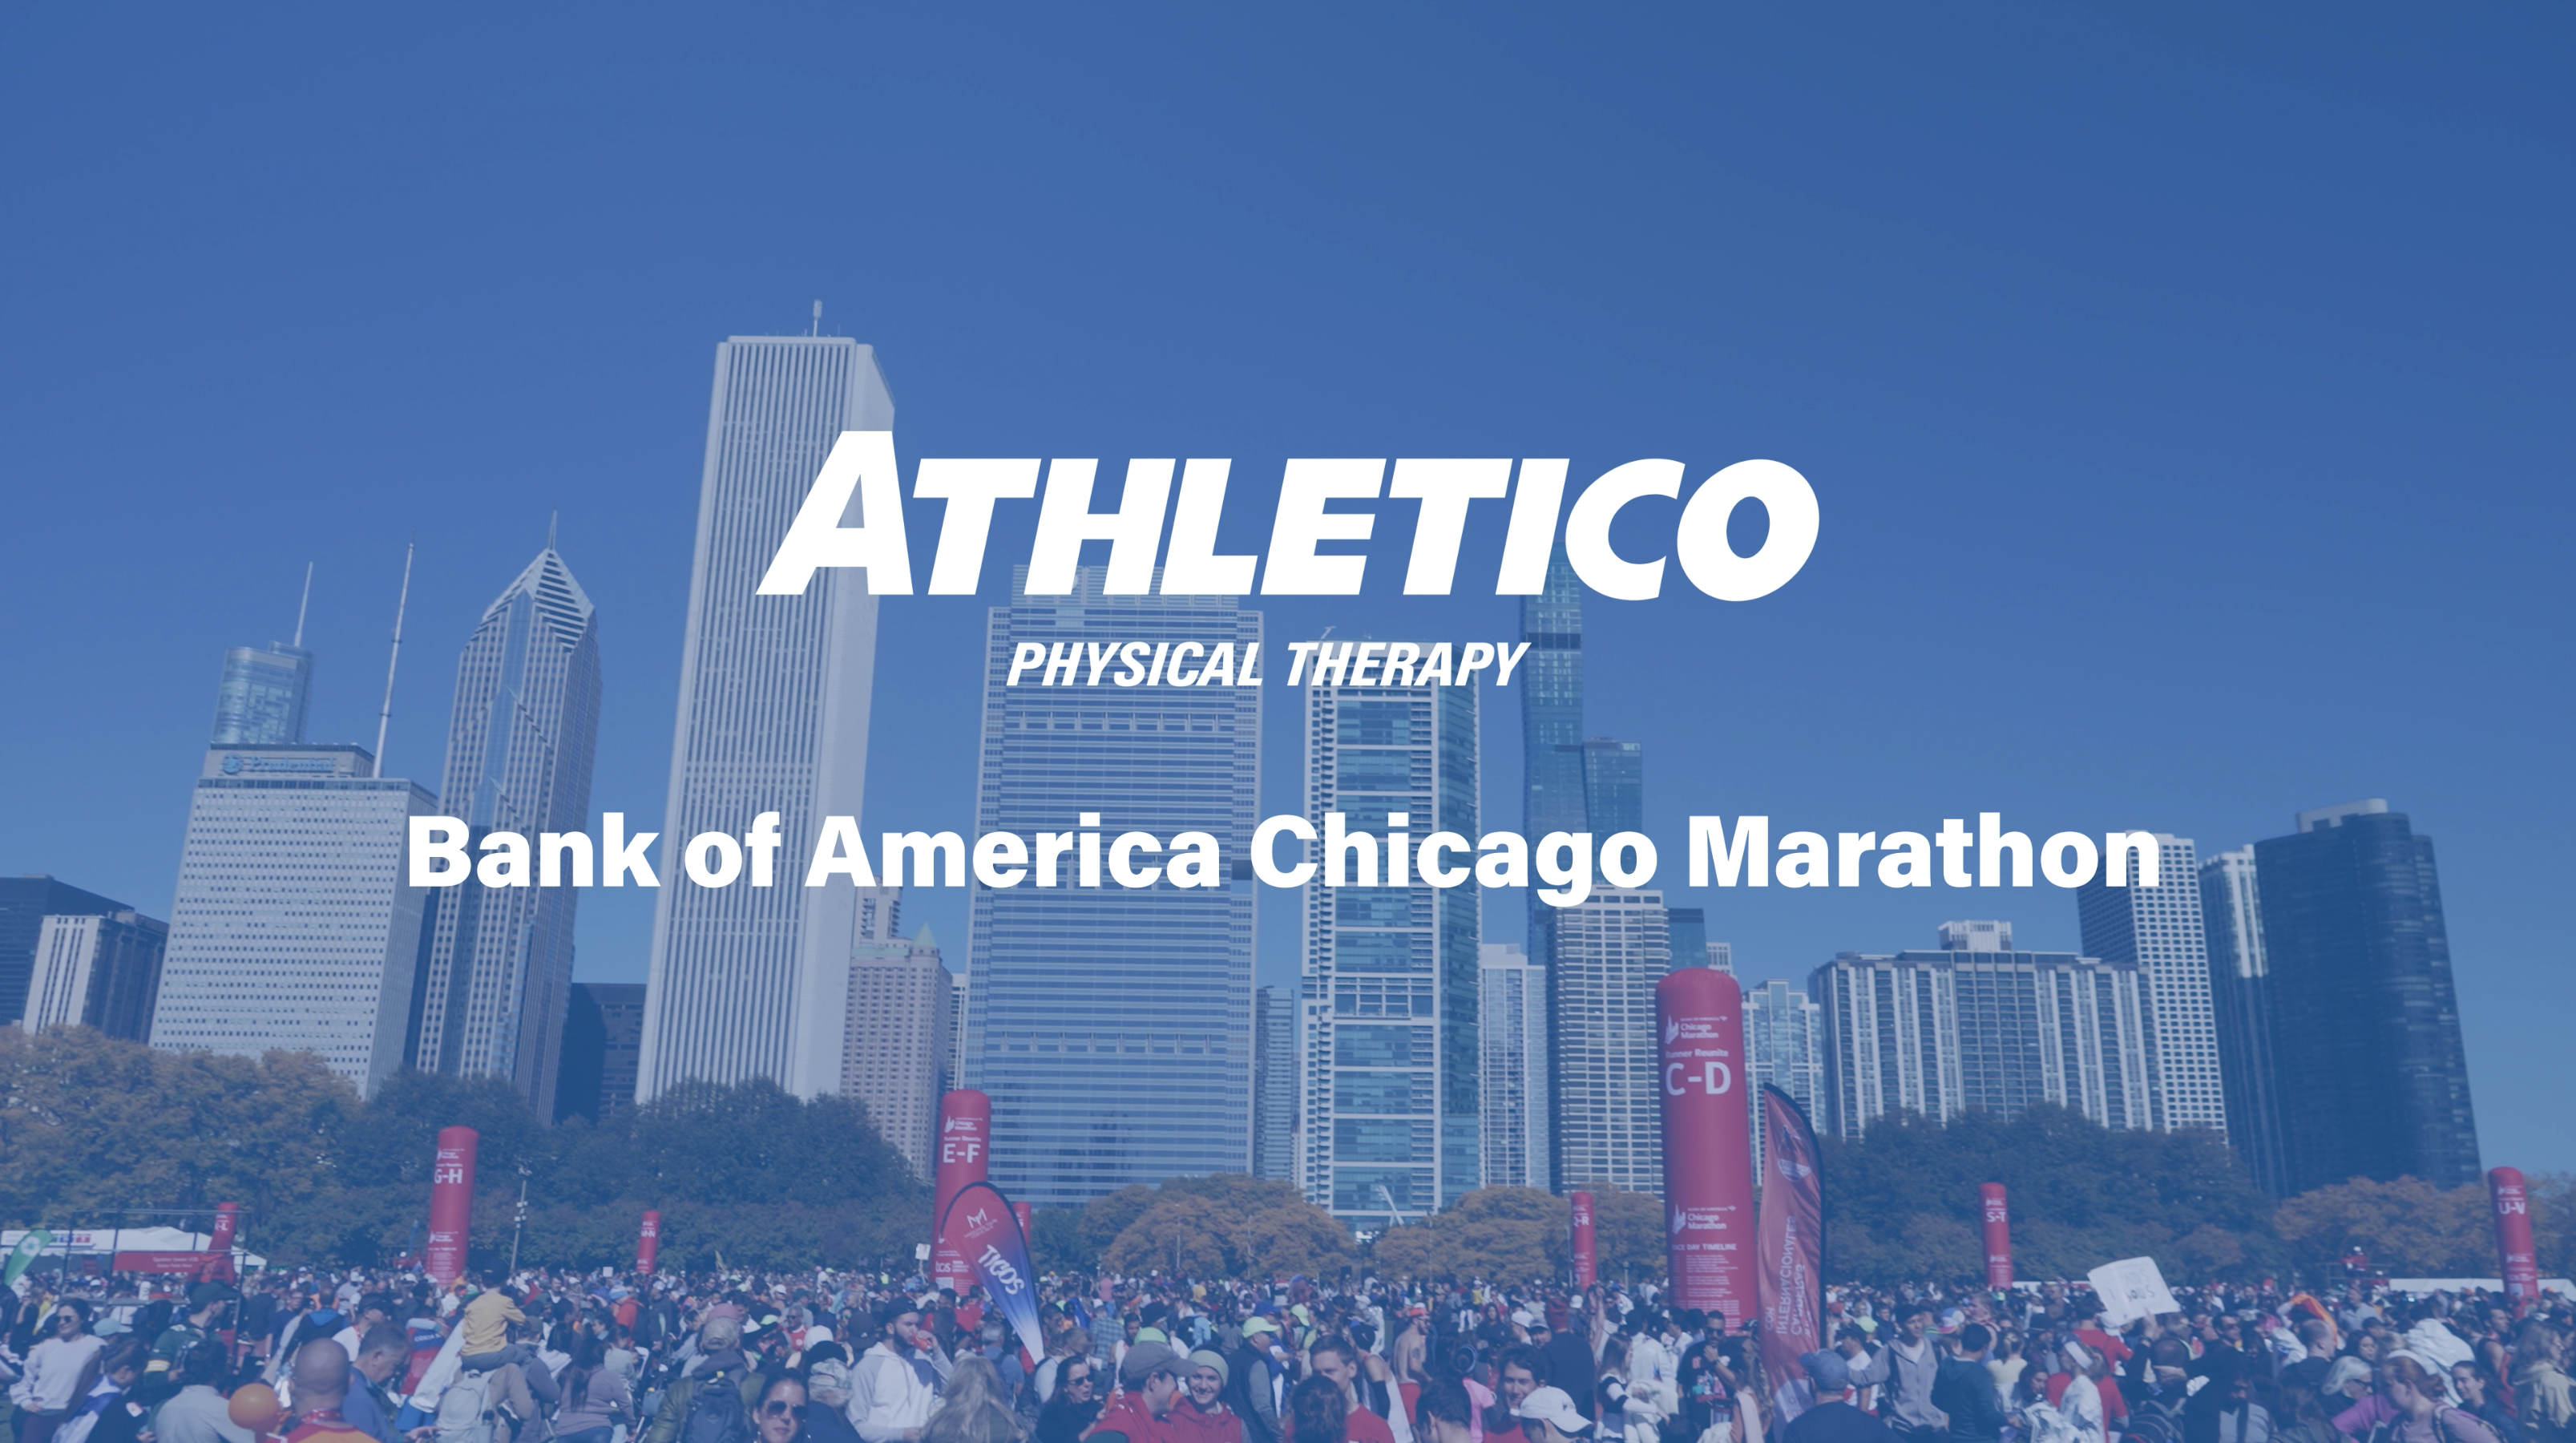 Athletico Physical Therapy / Bank of America Partnership on WGN